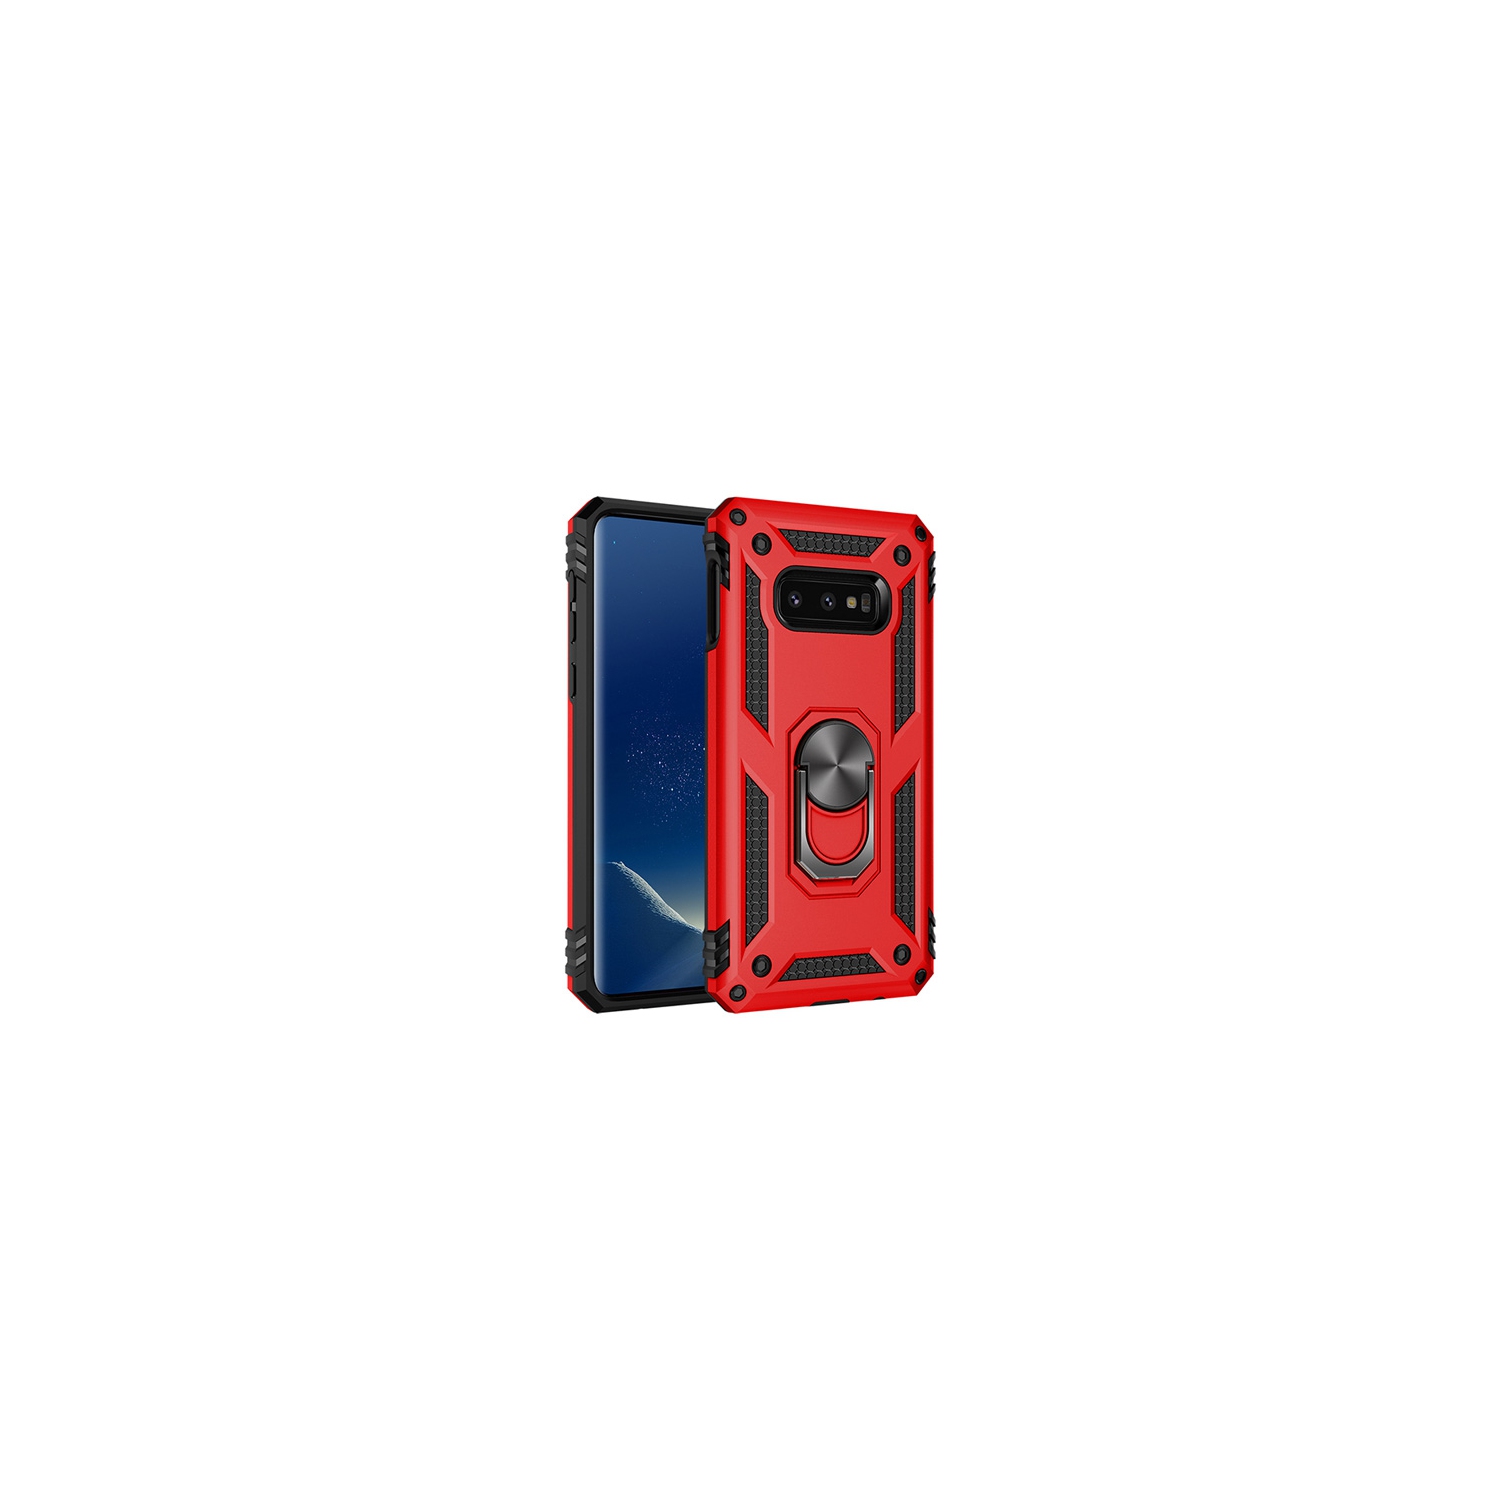 【CSmart】 Anti-Drop Hybrid Magnetic Hard Armor Case with Ring Holder for Samsung Galaxy S8, Red